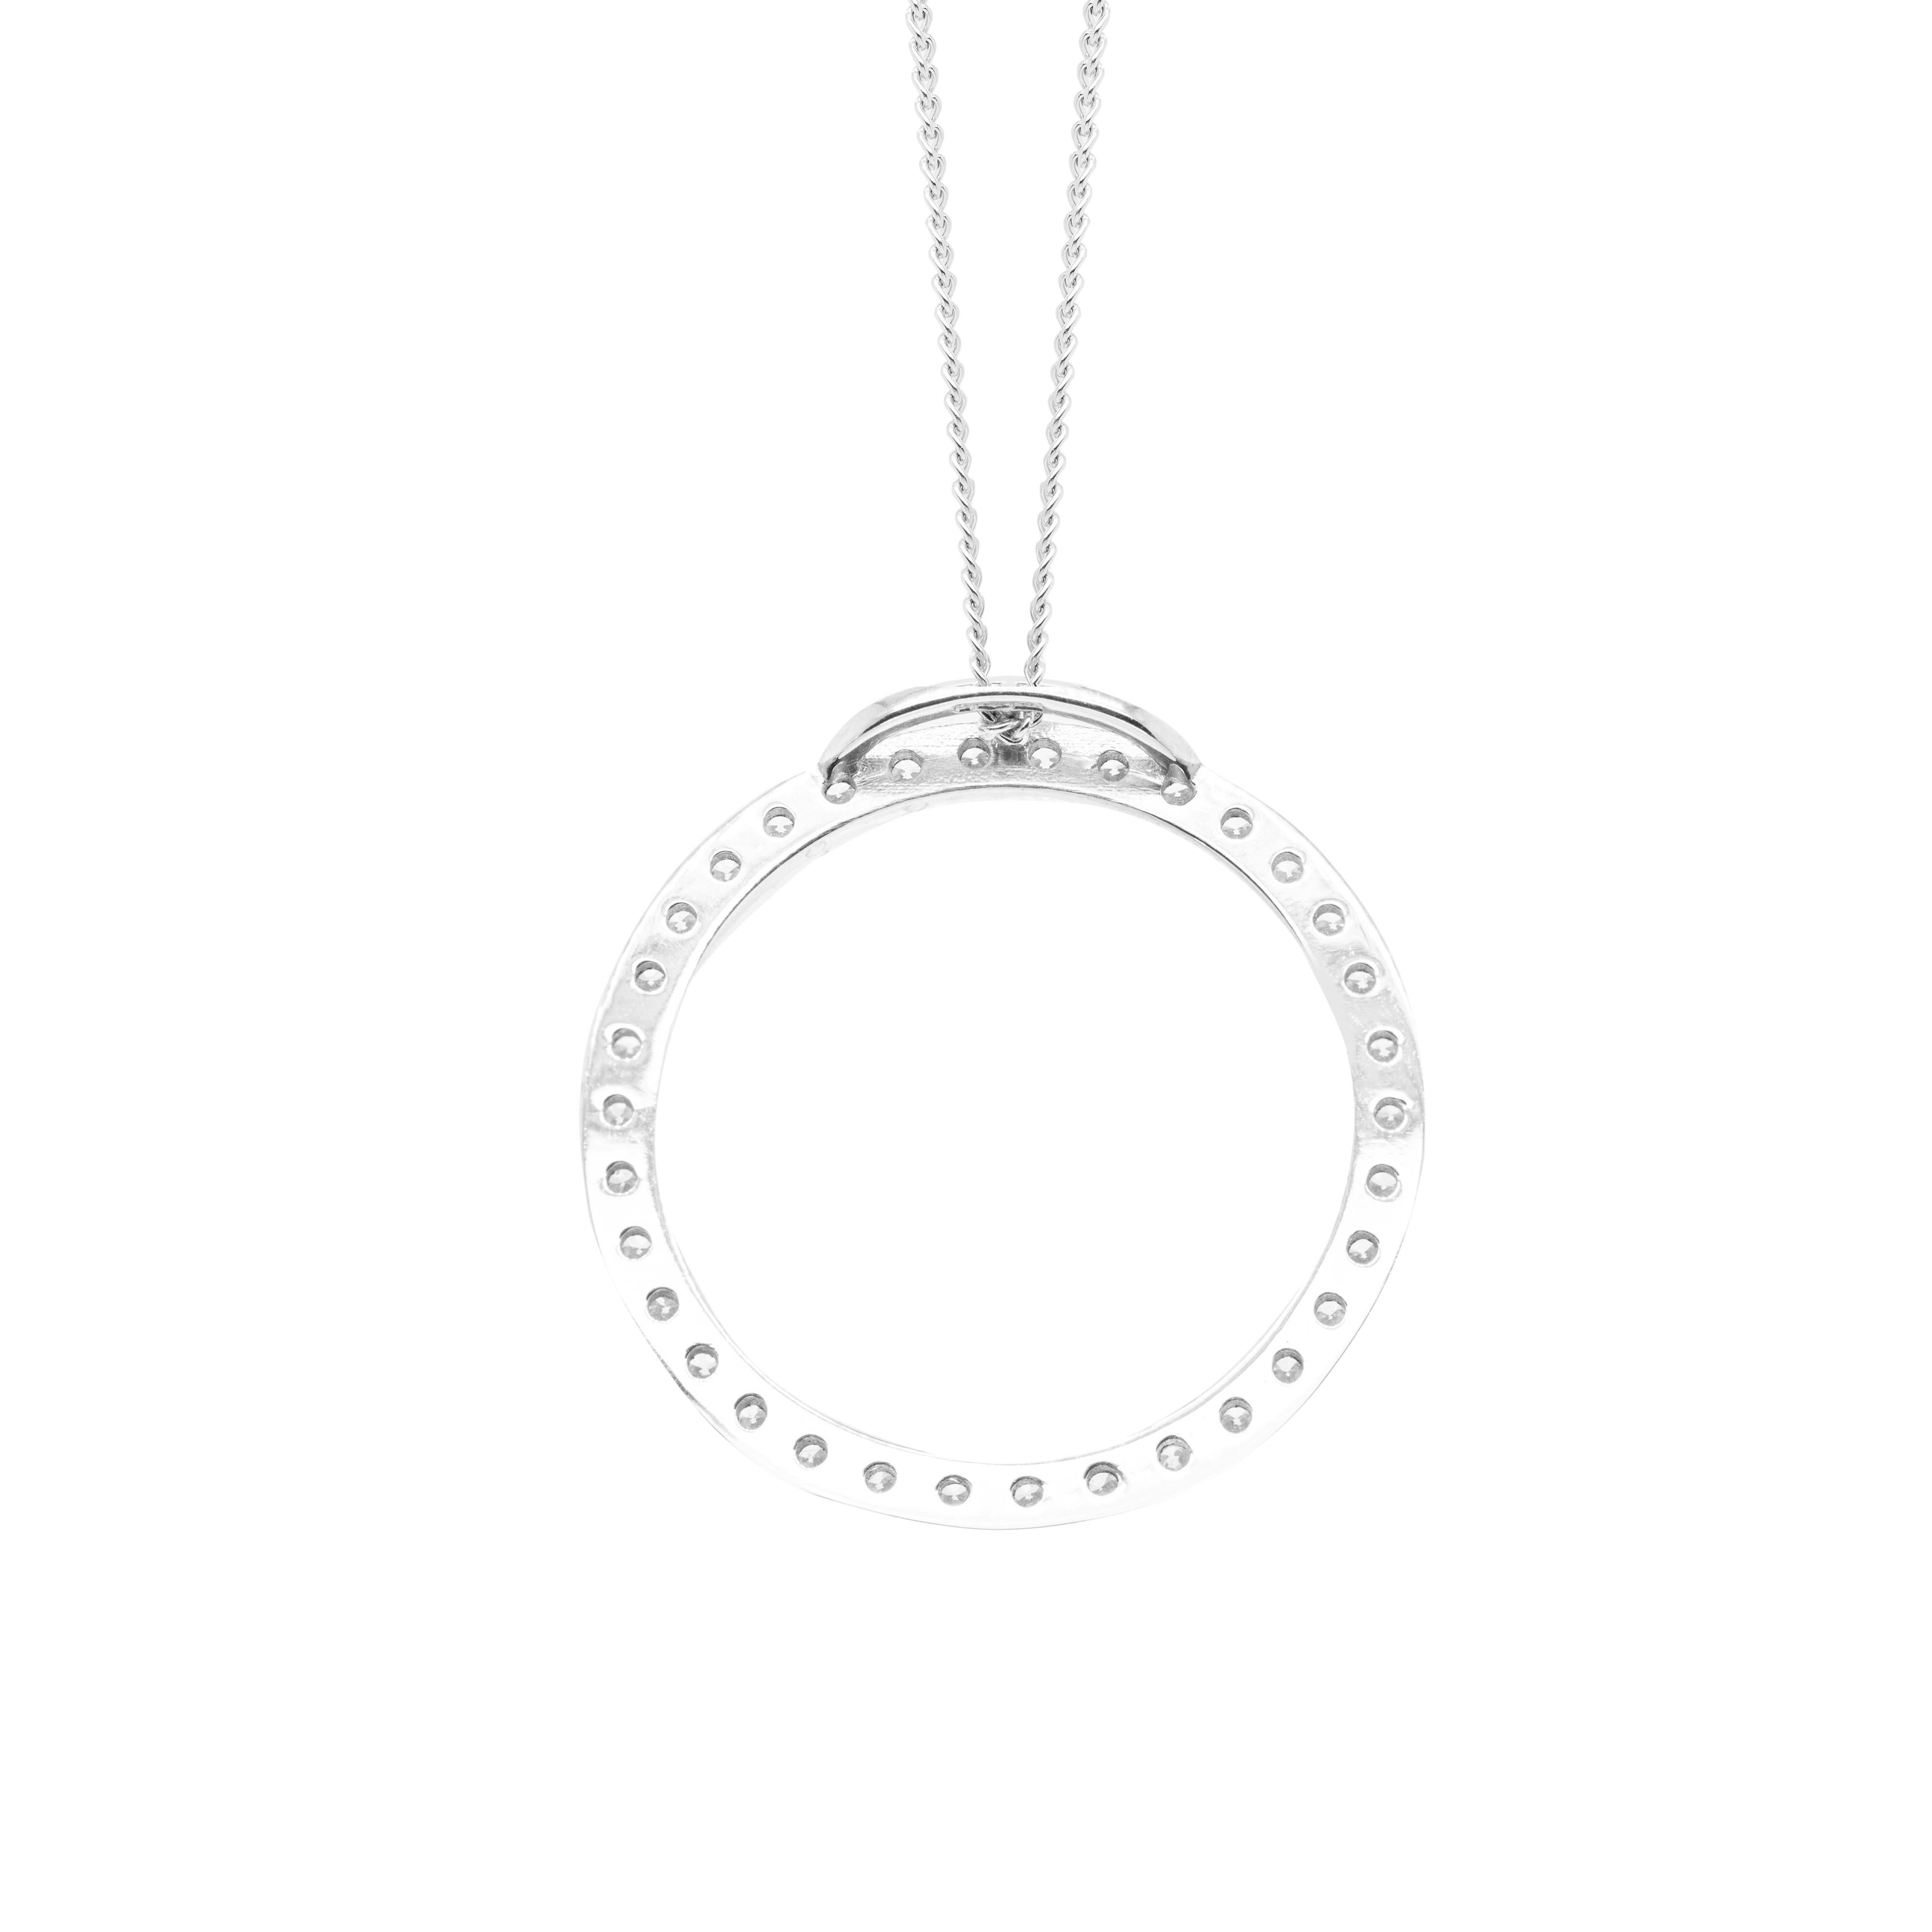 This gorgeous necklace features a diamond set circle pendant measuring 26mm in diameter. The pendant is beautifully inlaid with 34 fine quality round brilliant cut diamonds coming to a total weight of 1.22ct set in platinum.  The circle hangs from a